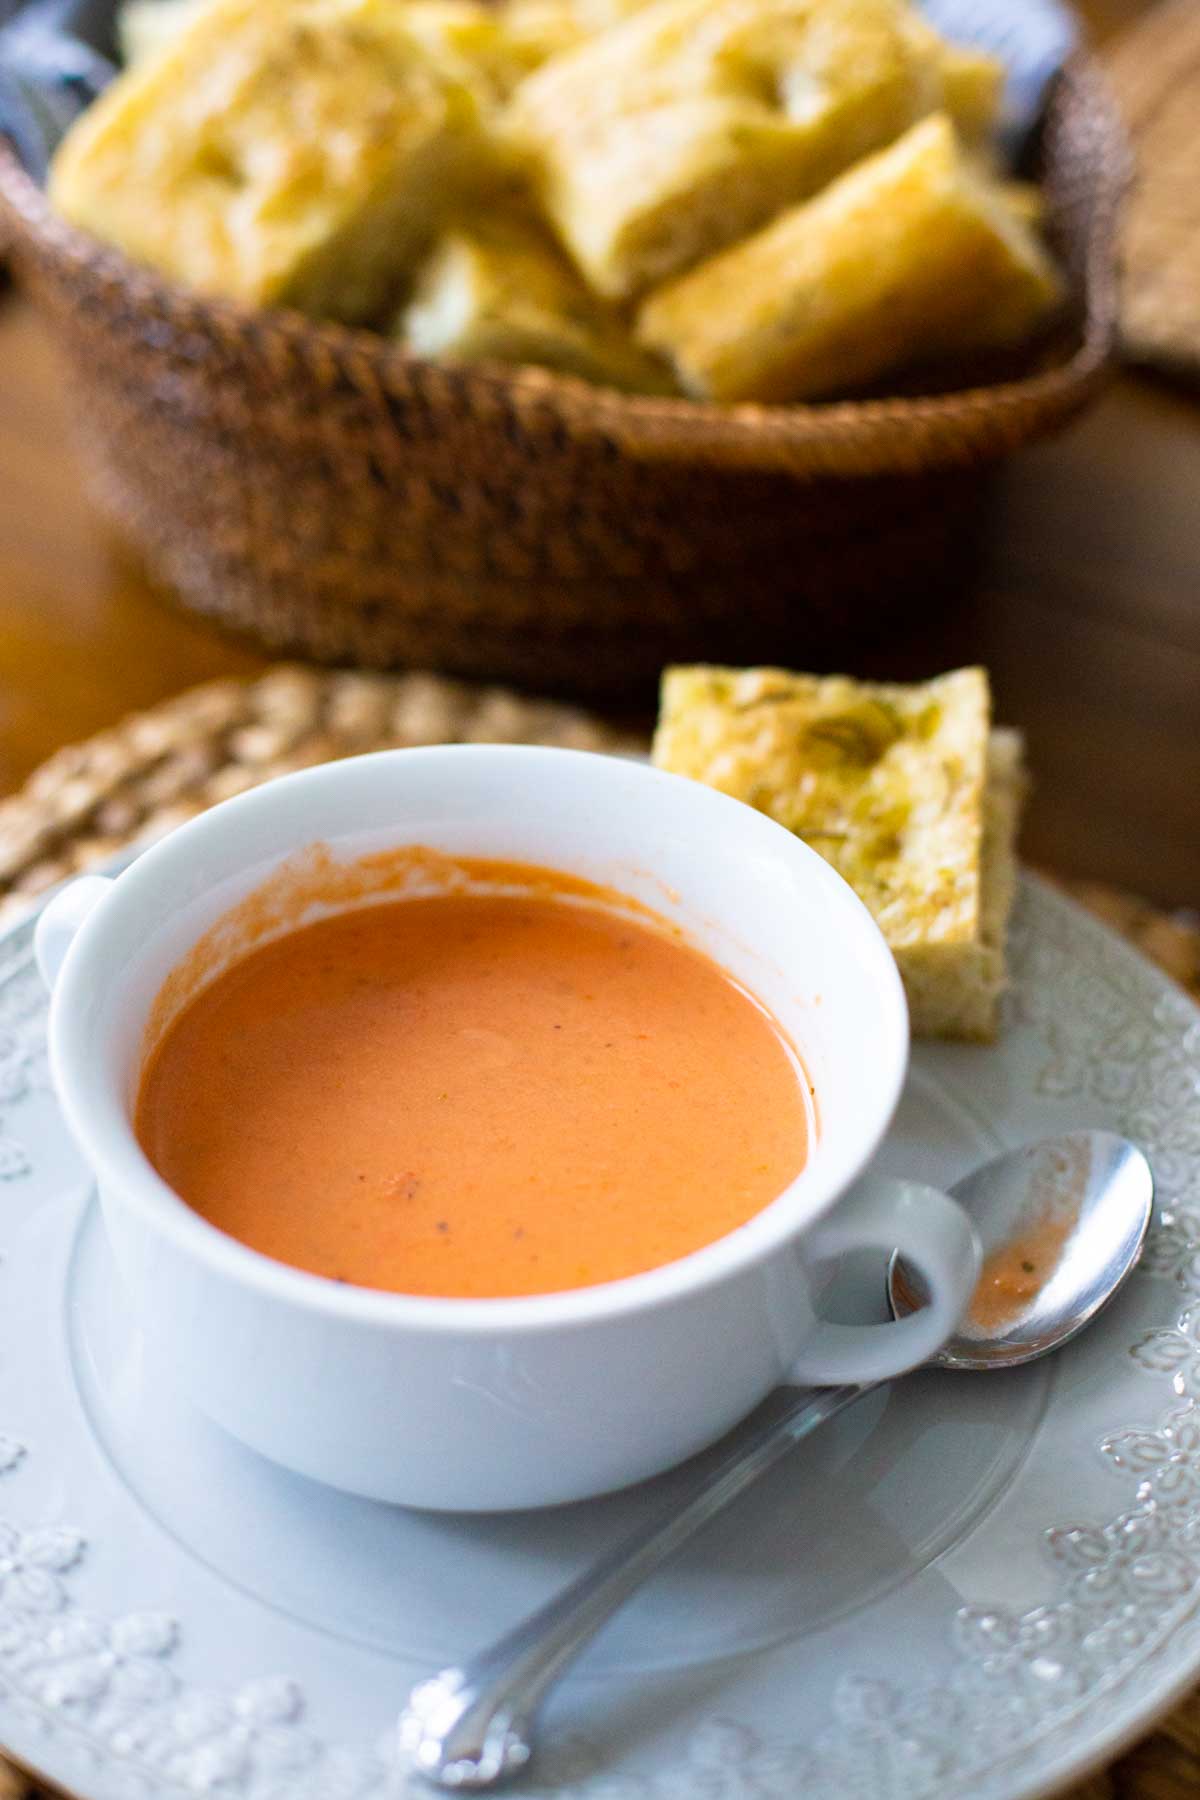 A serving of tomato bisque on a plate next to a basket filled with homemade bread.